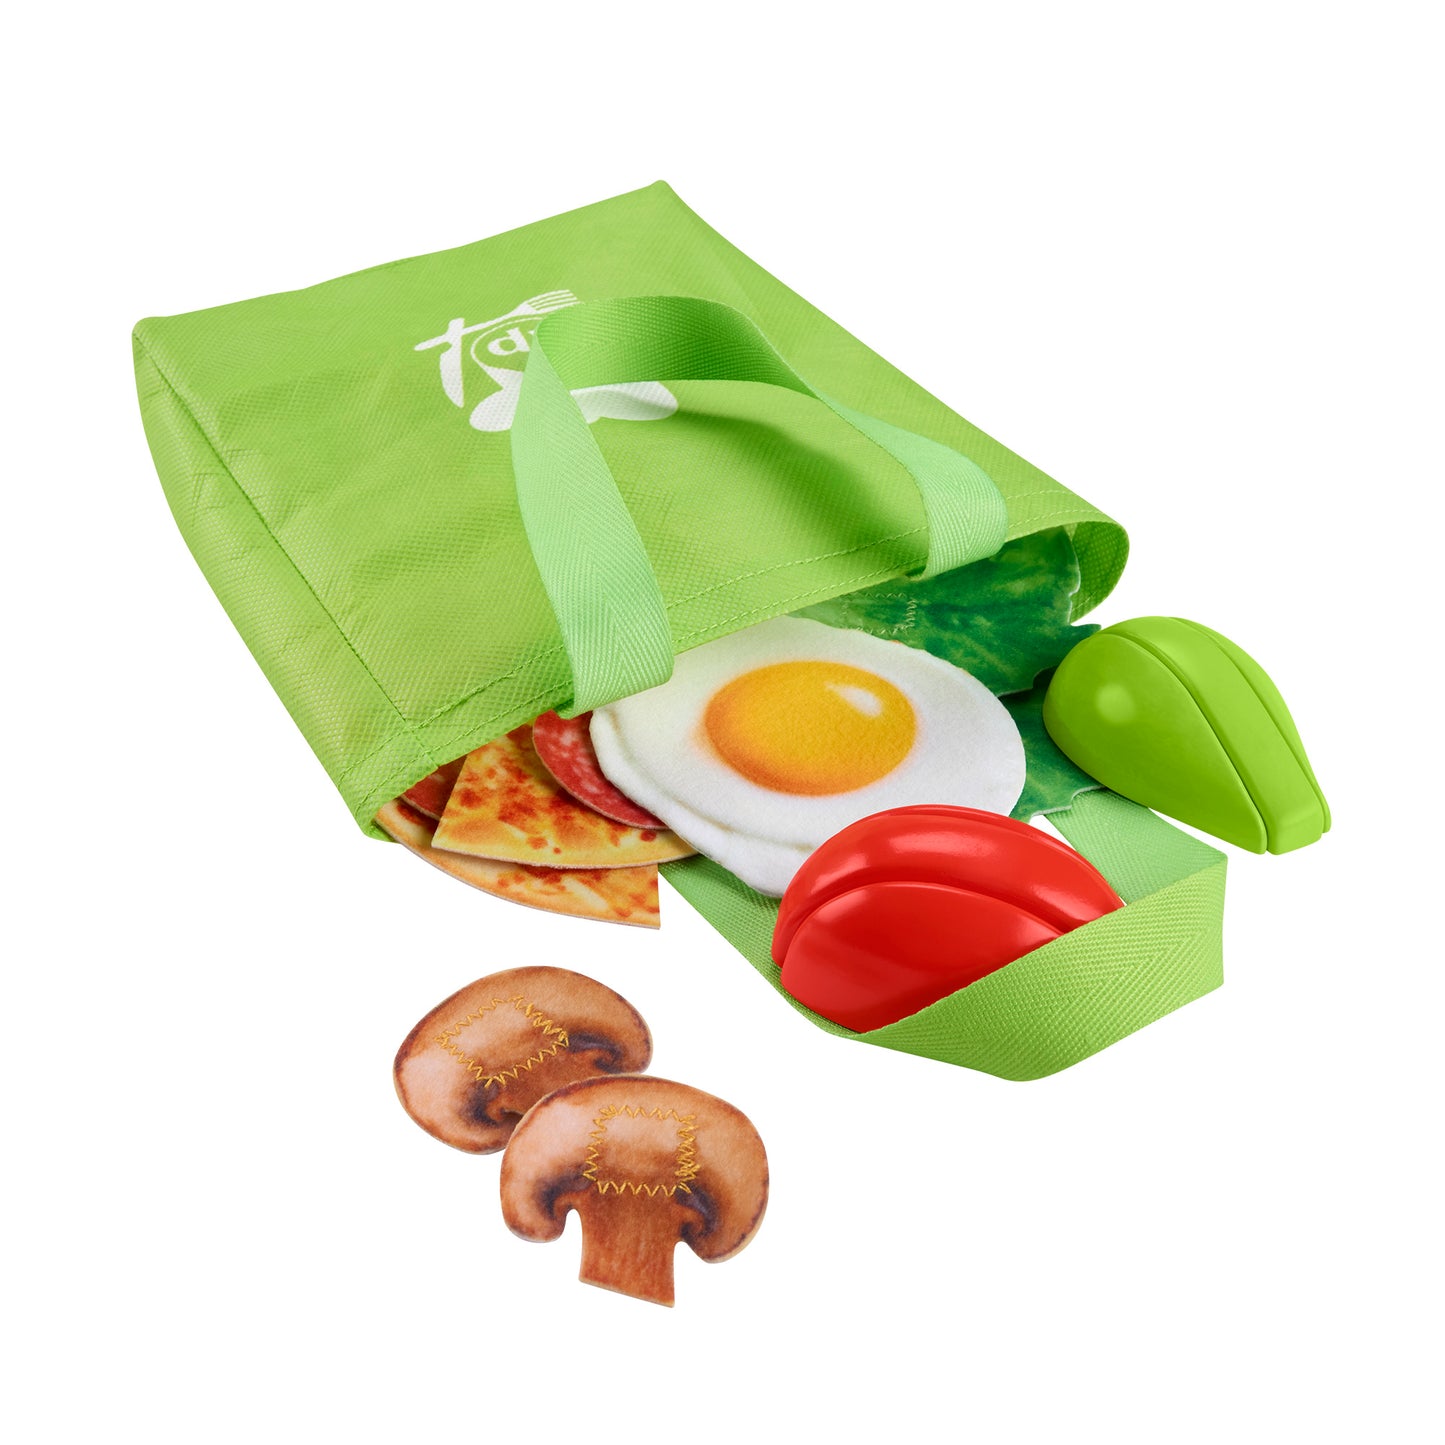 Fisher-Price Laugh & Learn 1-2-3 Follow the Recipe Meal Kit